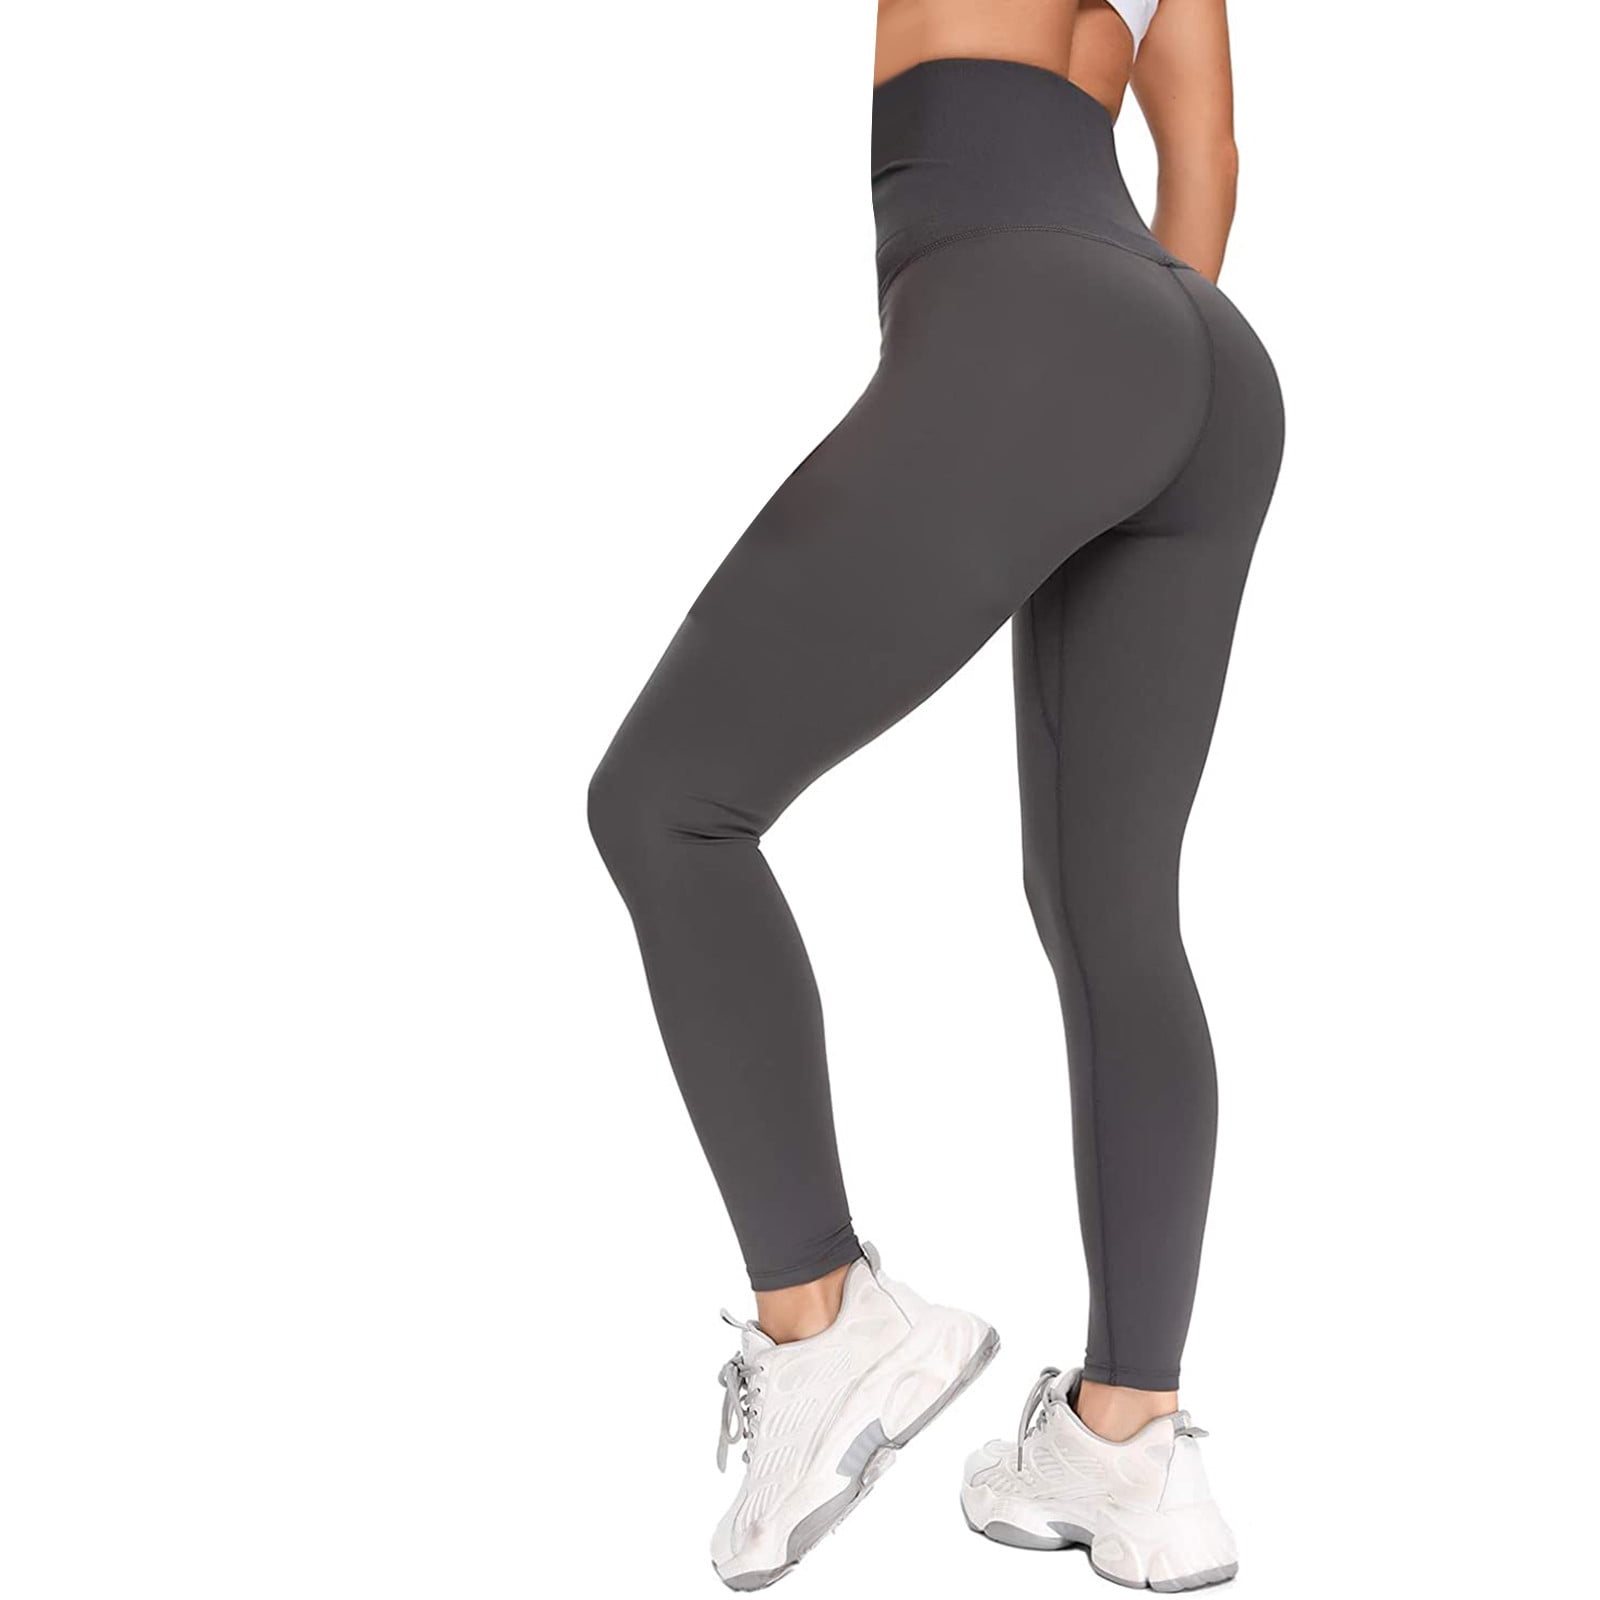 Flare Yoga Pants for Women High Waist Yoga Pants with Ruched